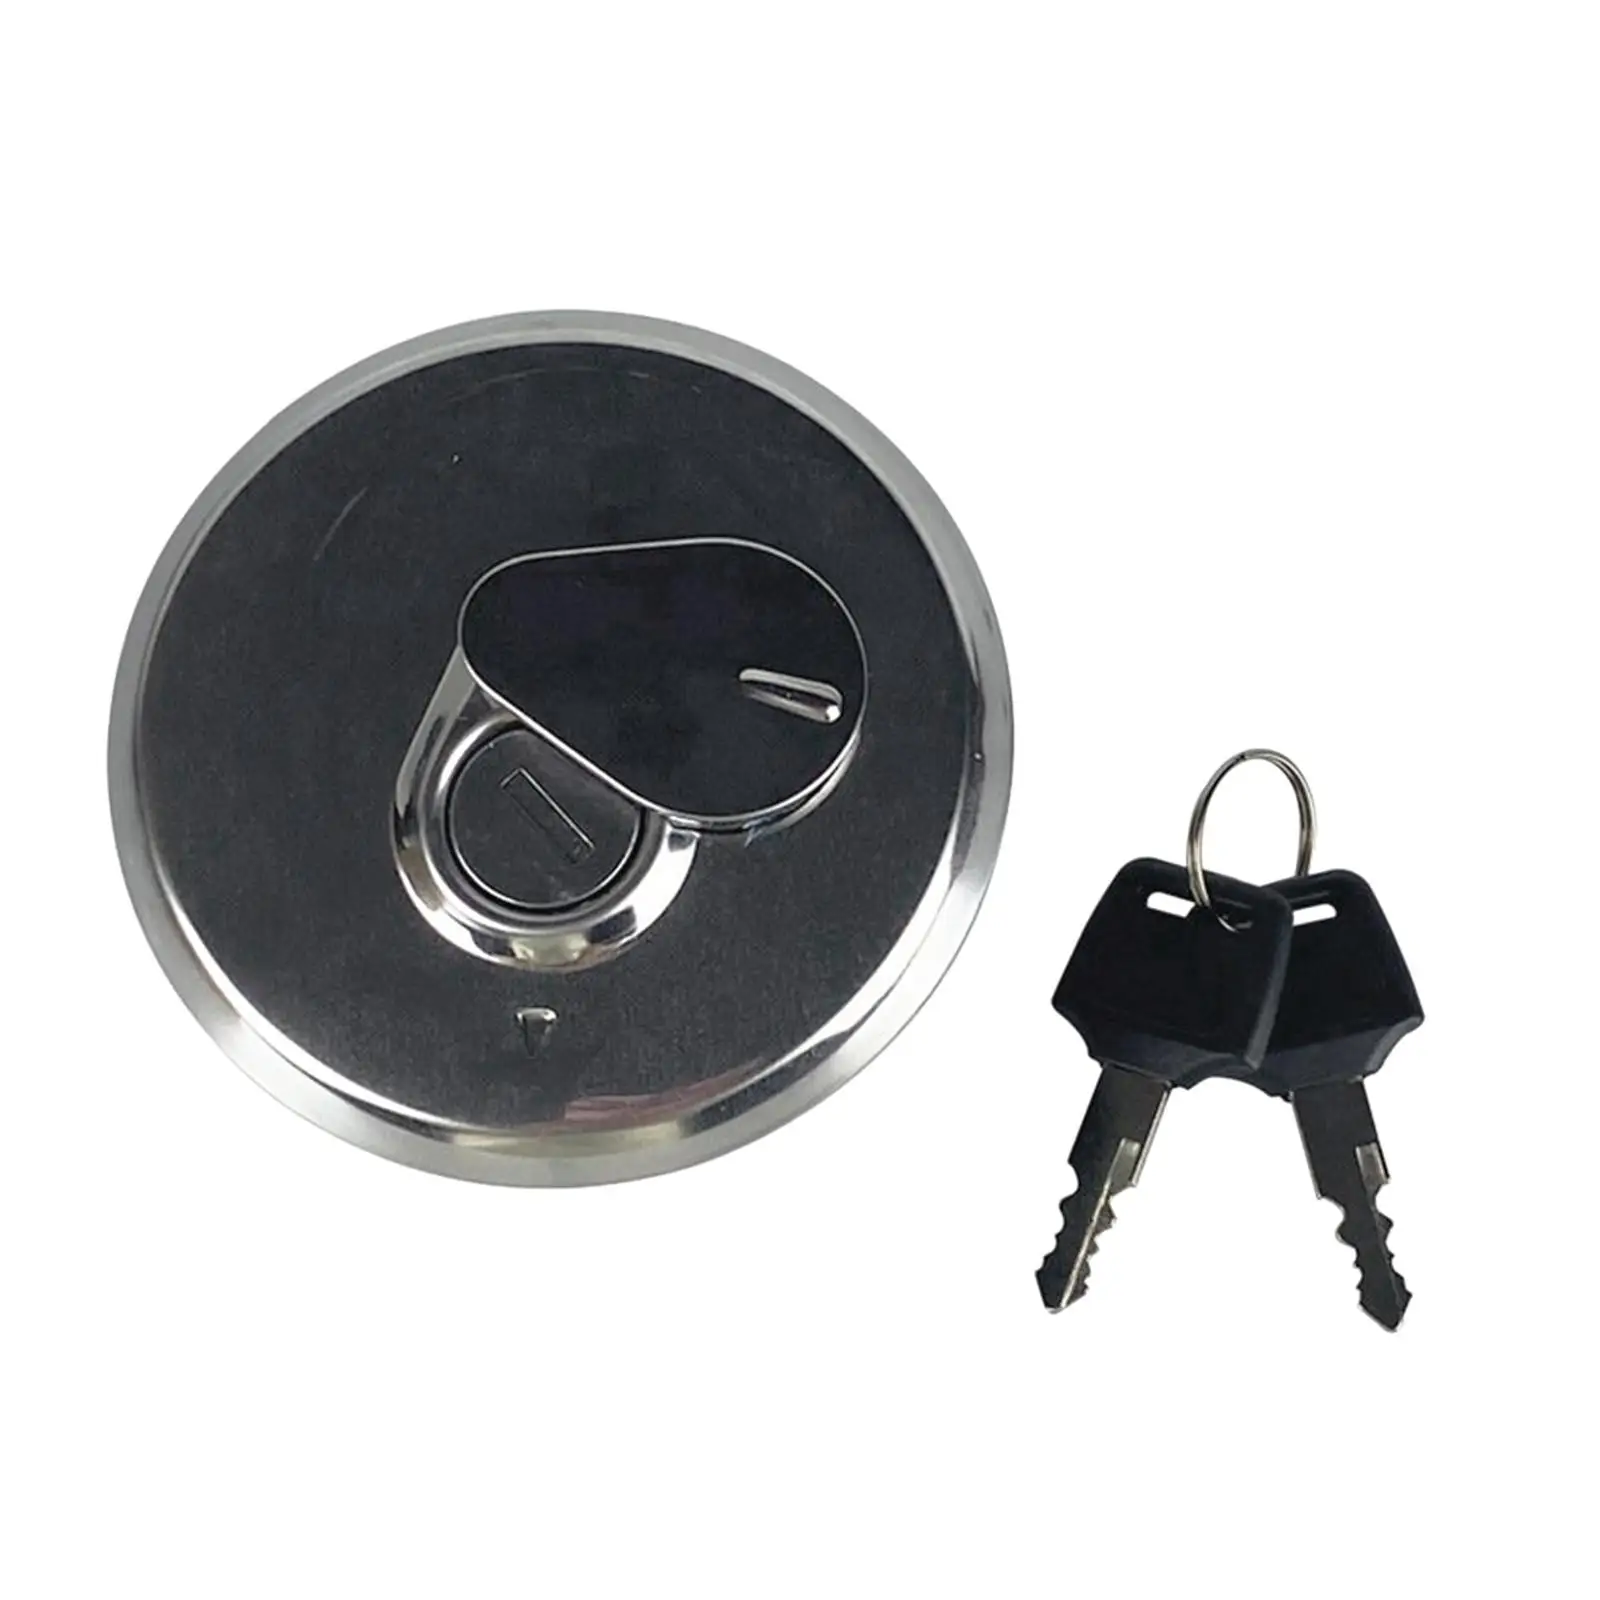 Motorbike Fuel Gas Tank Cap Cover for Suzuki Gn125 Professional Durable